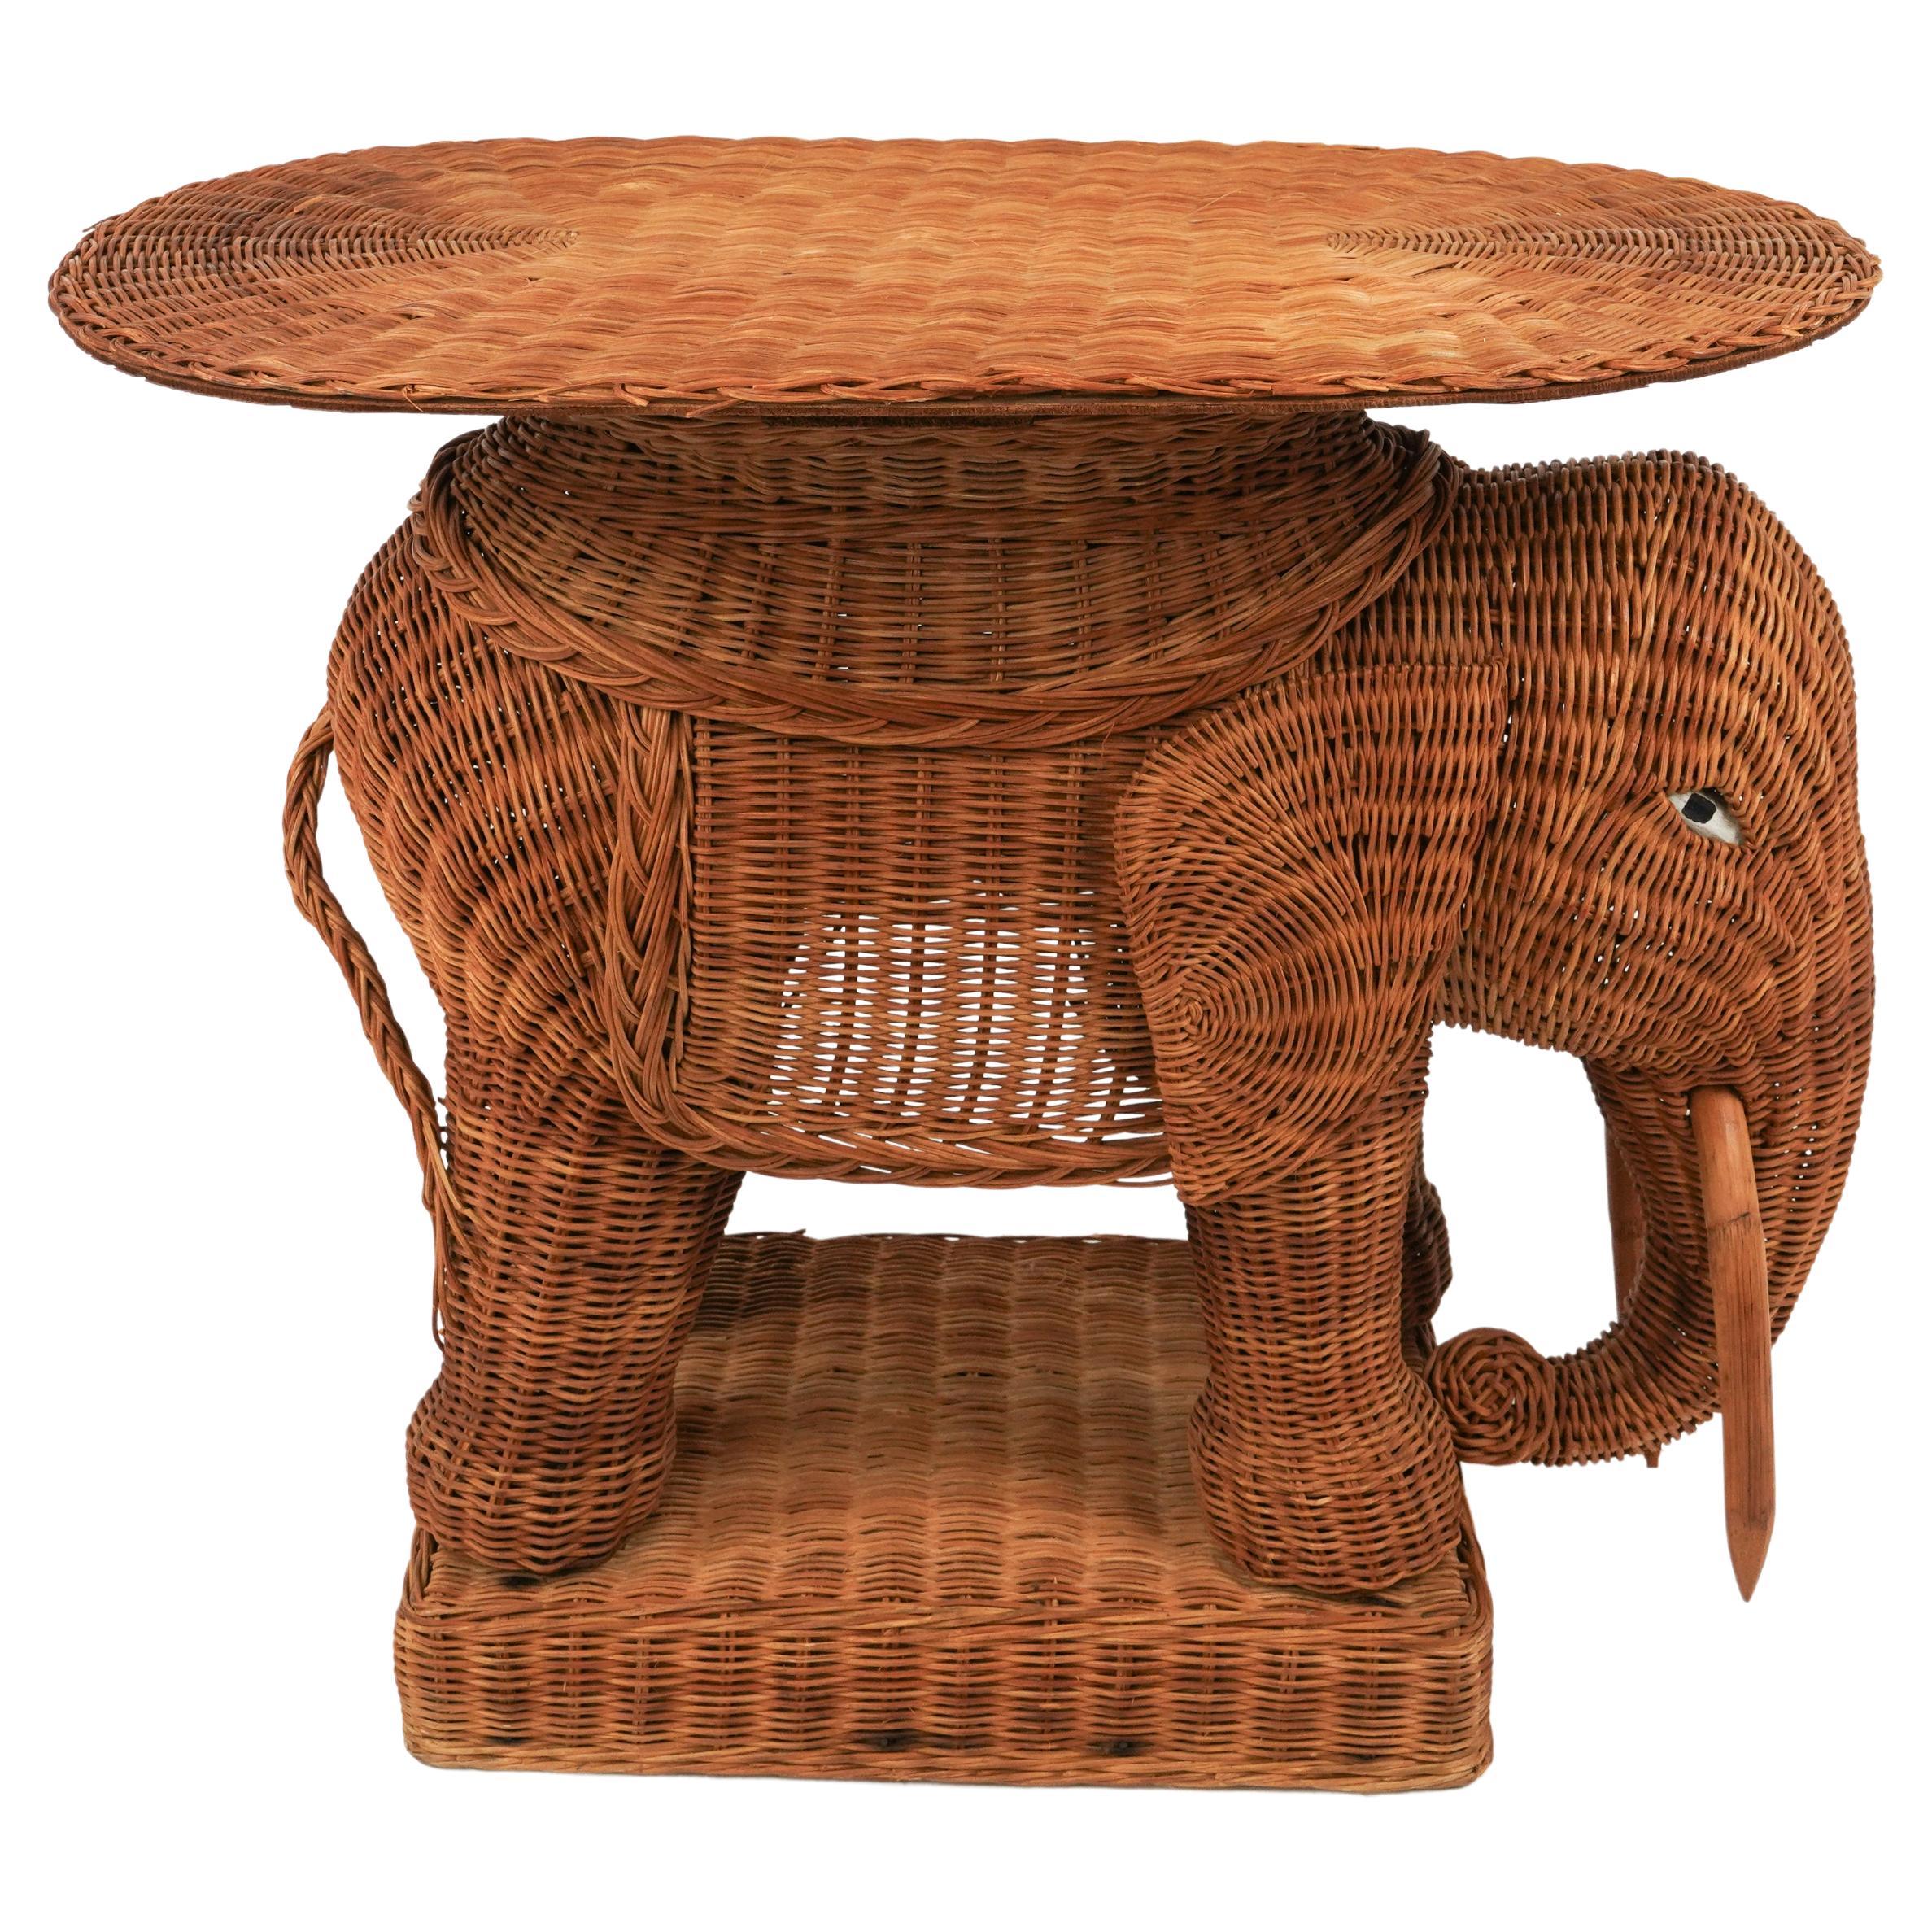 Rattan and Wicker Elephant Side Coffee Table Vivai Del Sud Style, Italy, 1960s For Sale